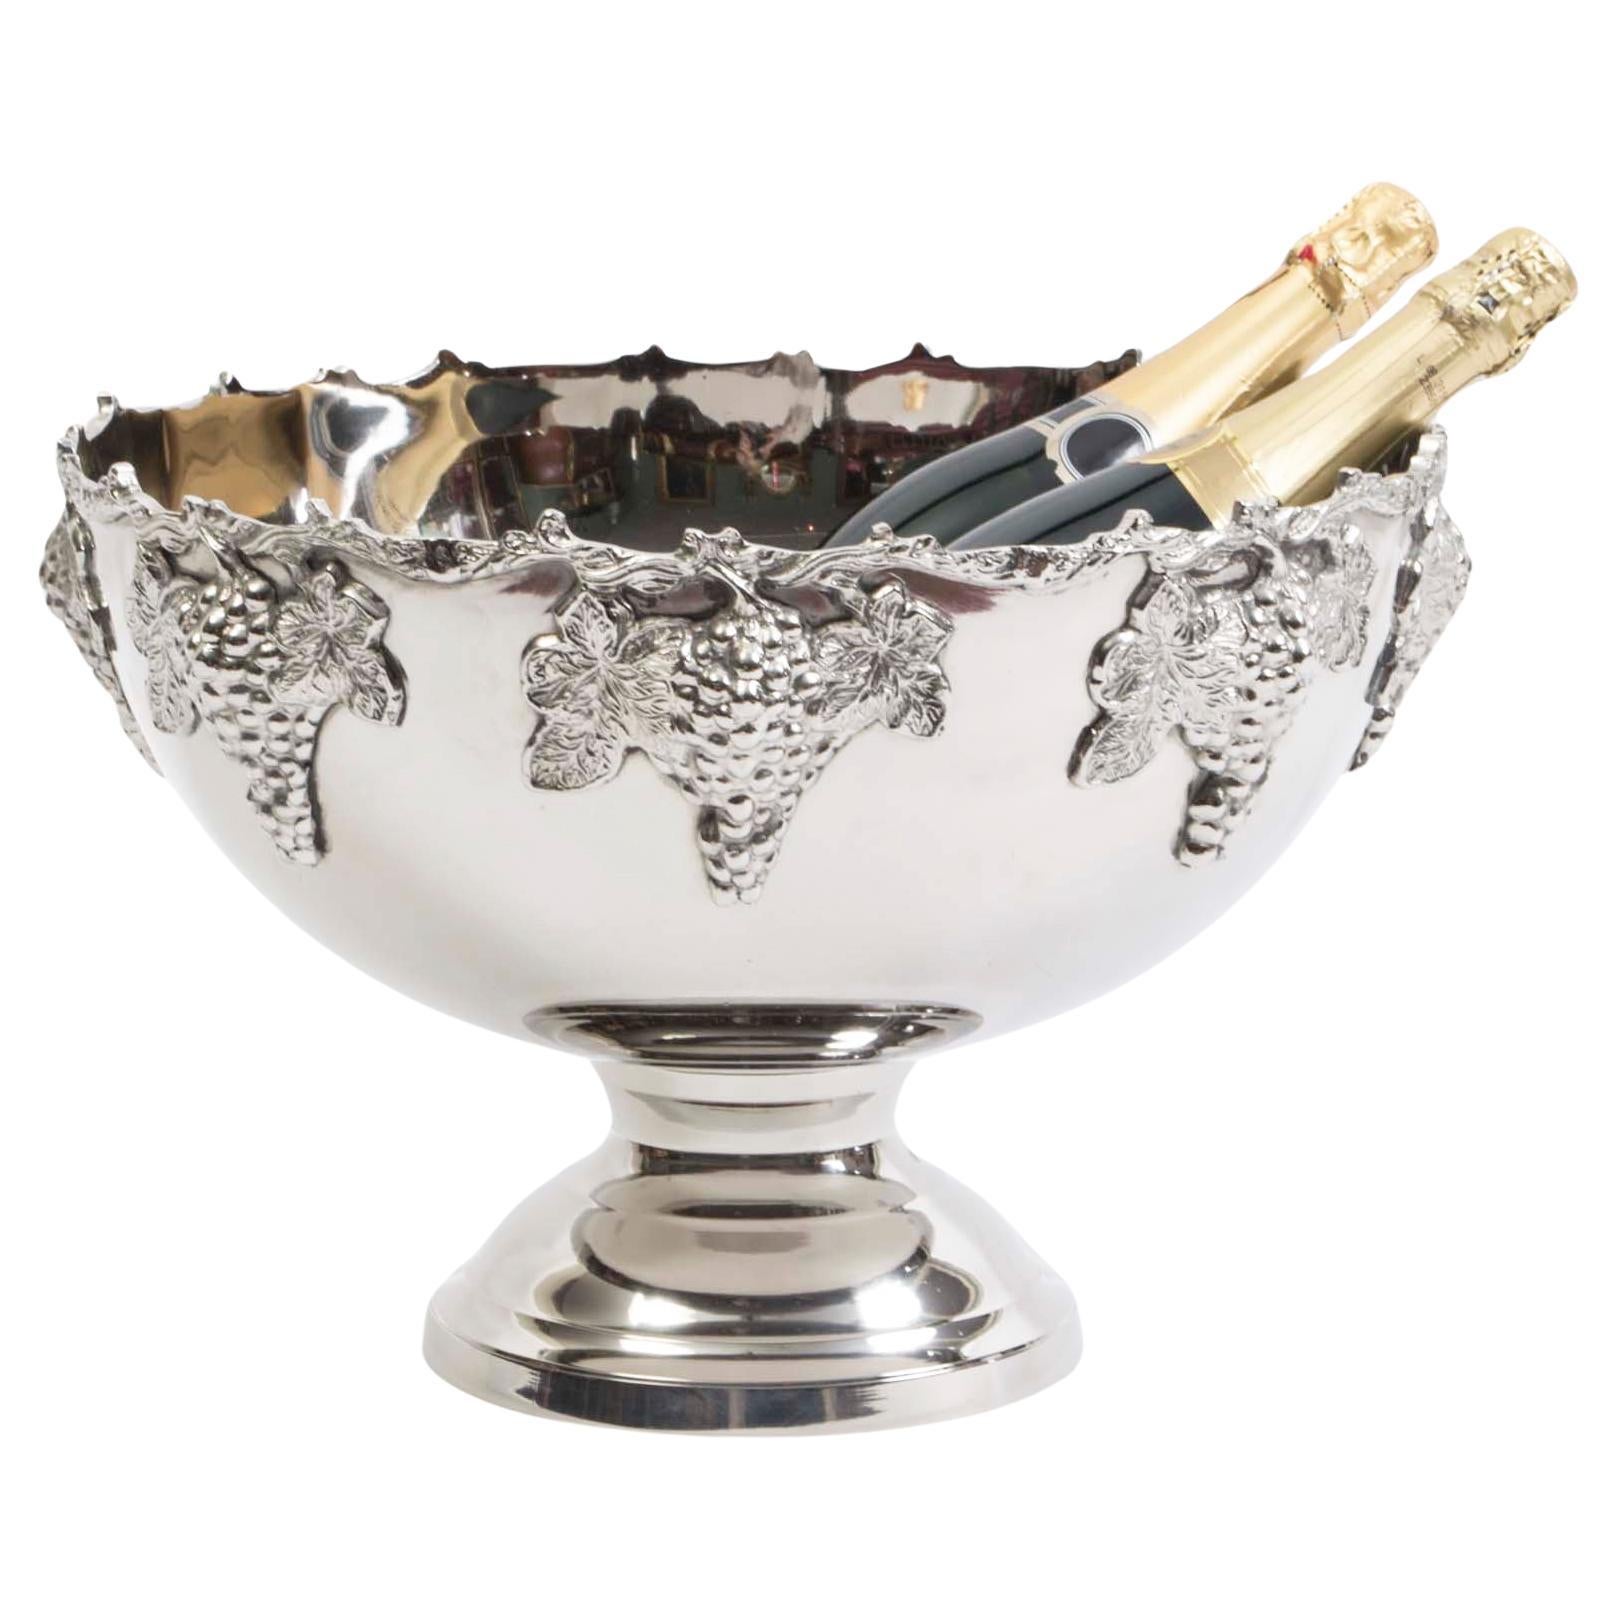 Vintage Silver Plated Monteith Punch Bowl Champagne Cooler 20th Century For Sale